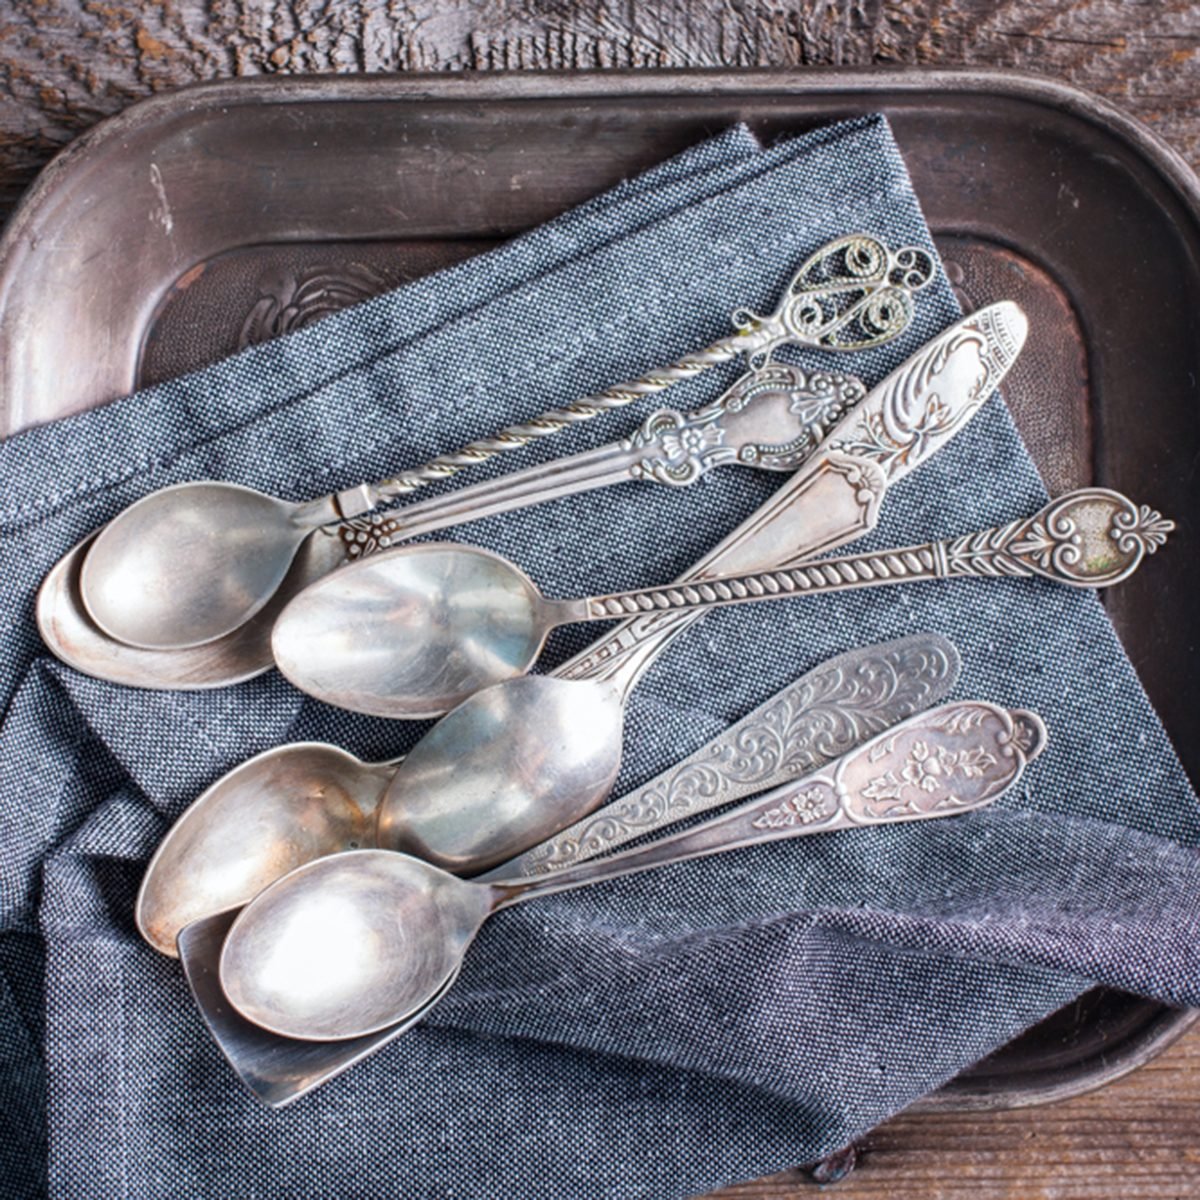 Vintage silver spoons on a tarnished silver tray with retro processing